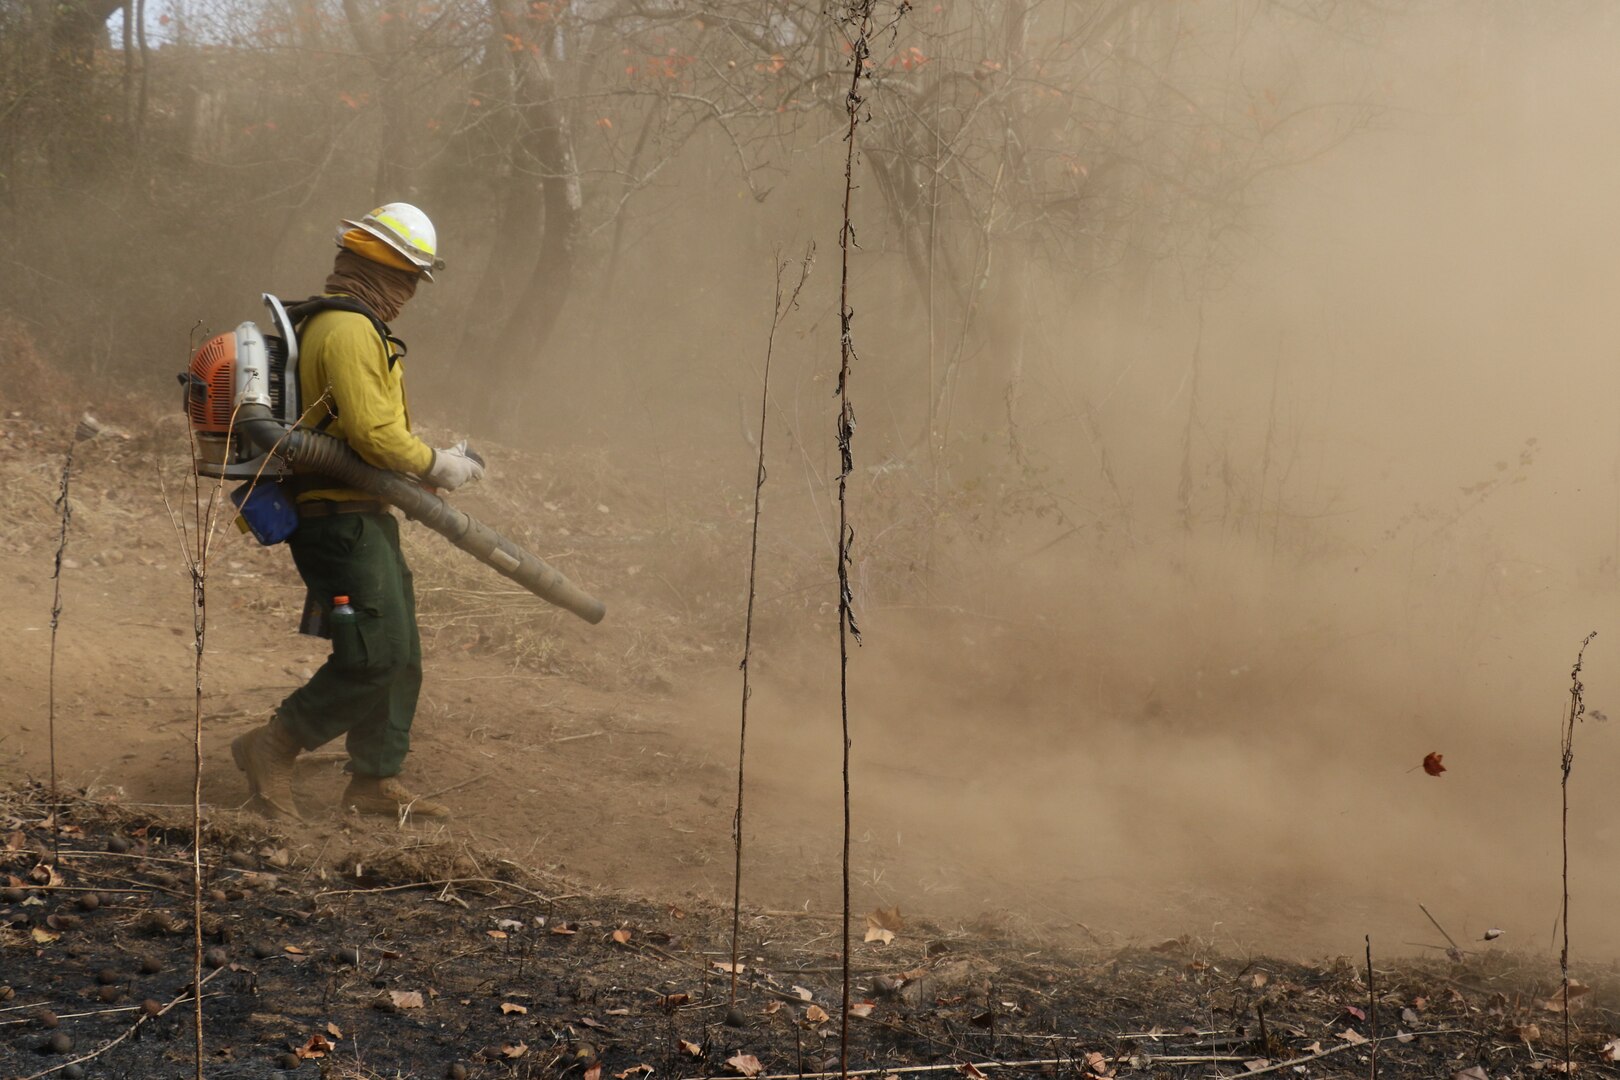 VNG deploys ground crews to Madison County, ends aerial fire suppression missions